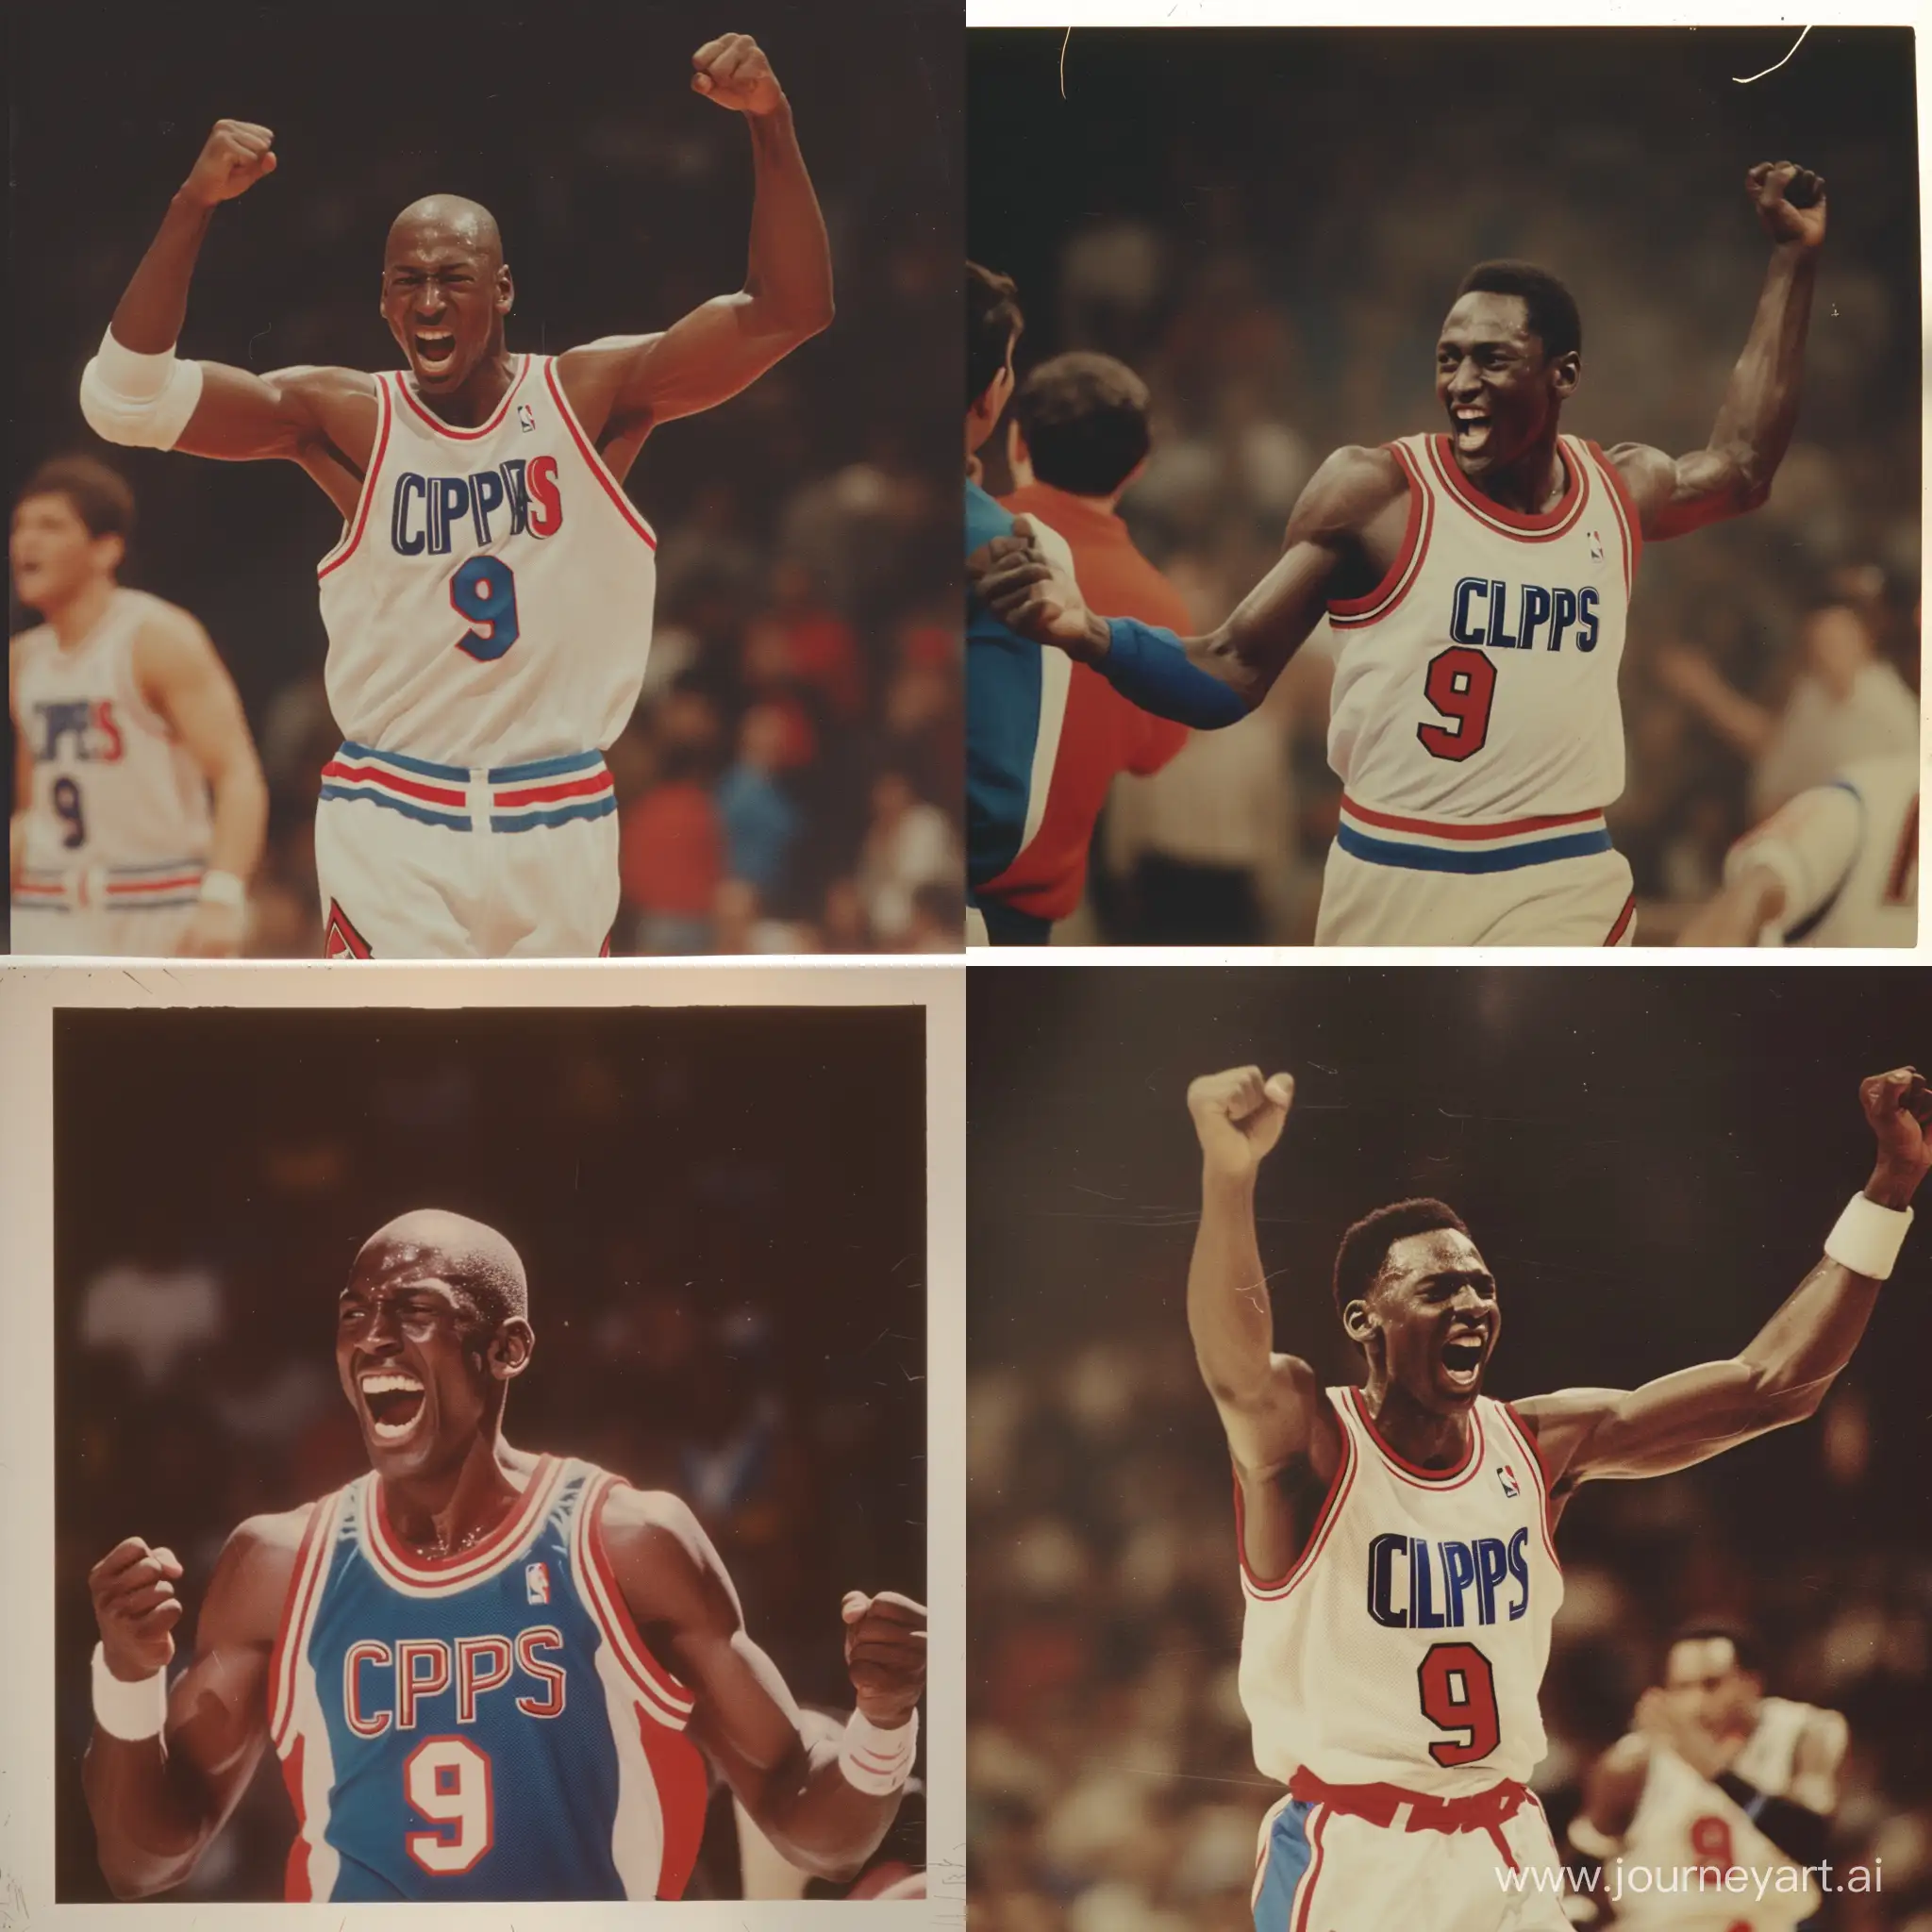 Young-Michael-Jordan-Victory-Celebration-in-Clippers-Jersey-1980s